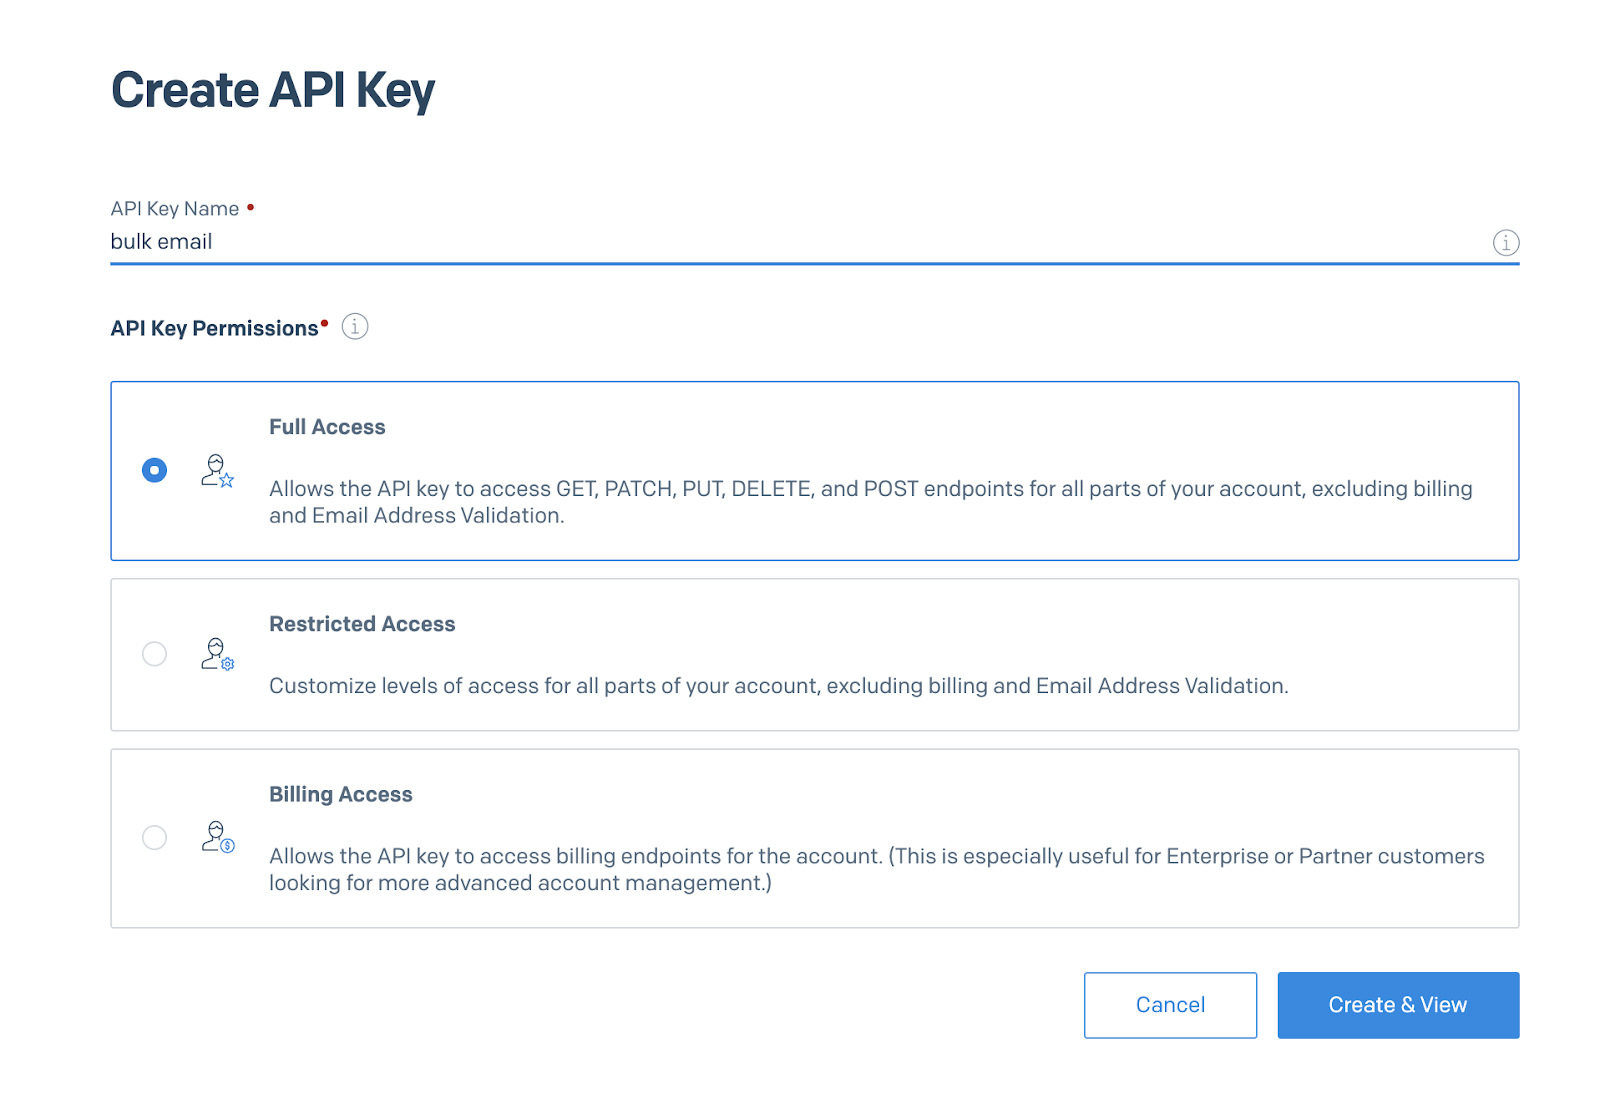 A screenshot of the SendGrid "Create API Key" page. "Full Access" is selected, and the key name is "bulk email".